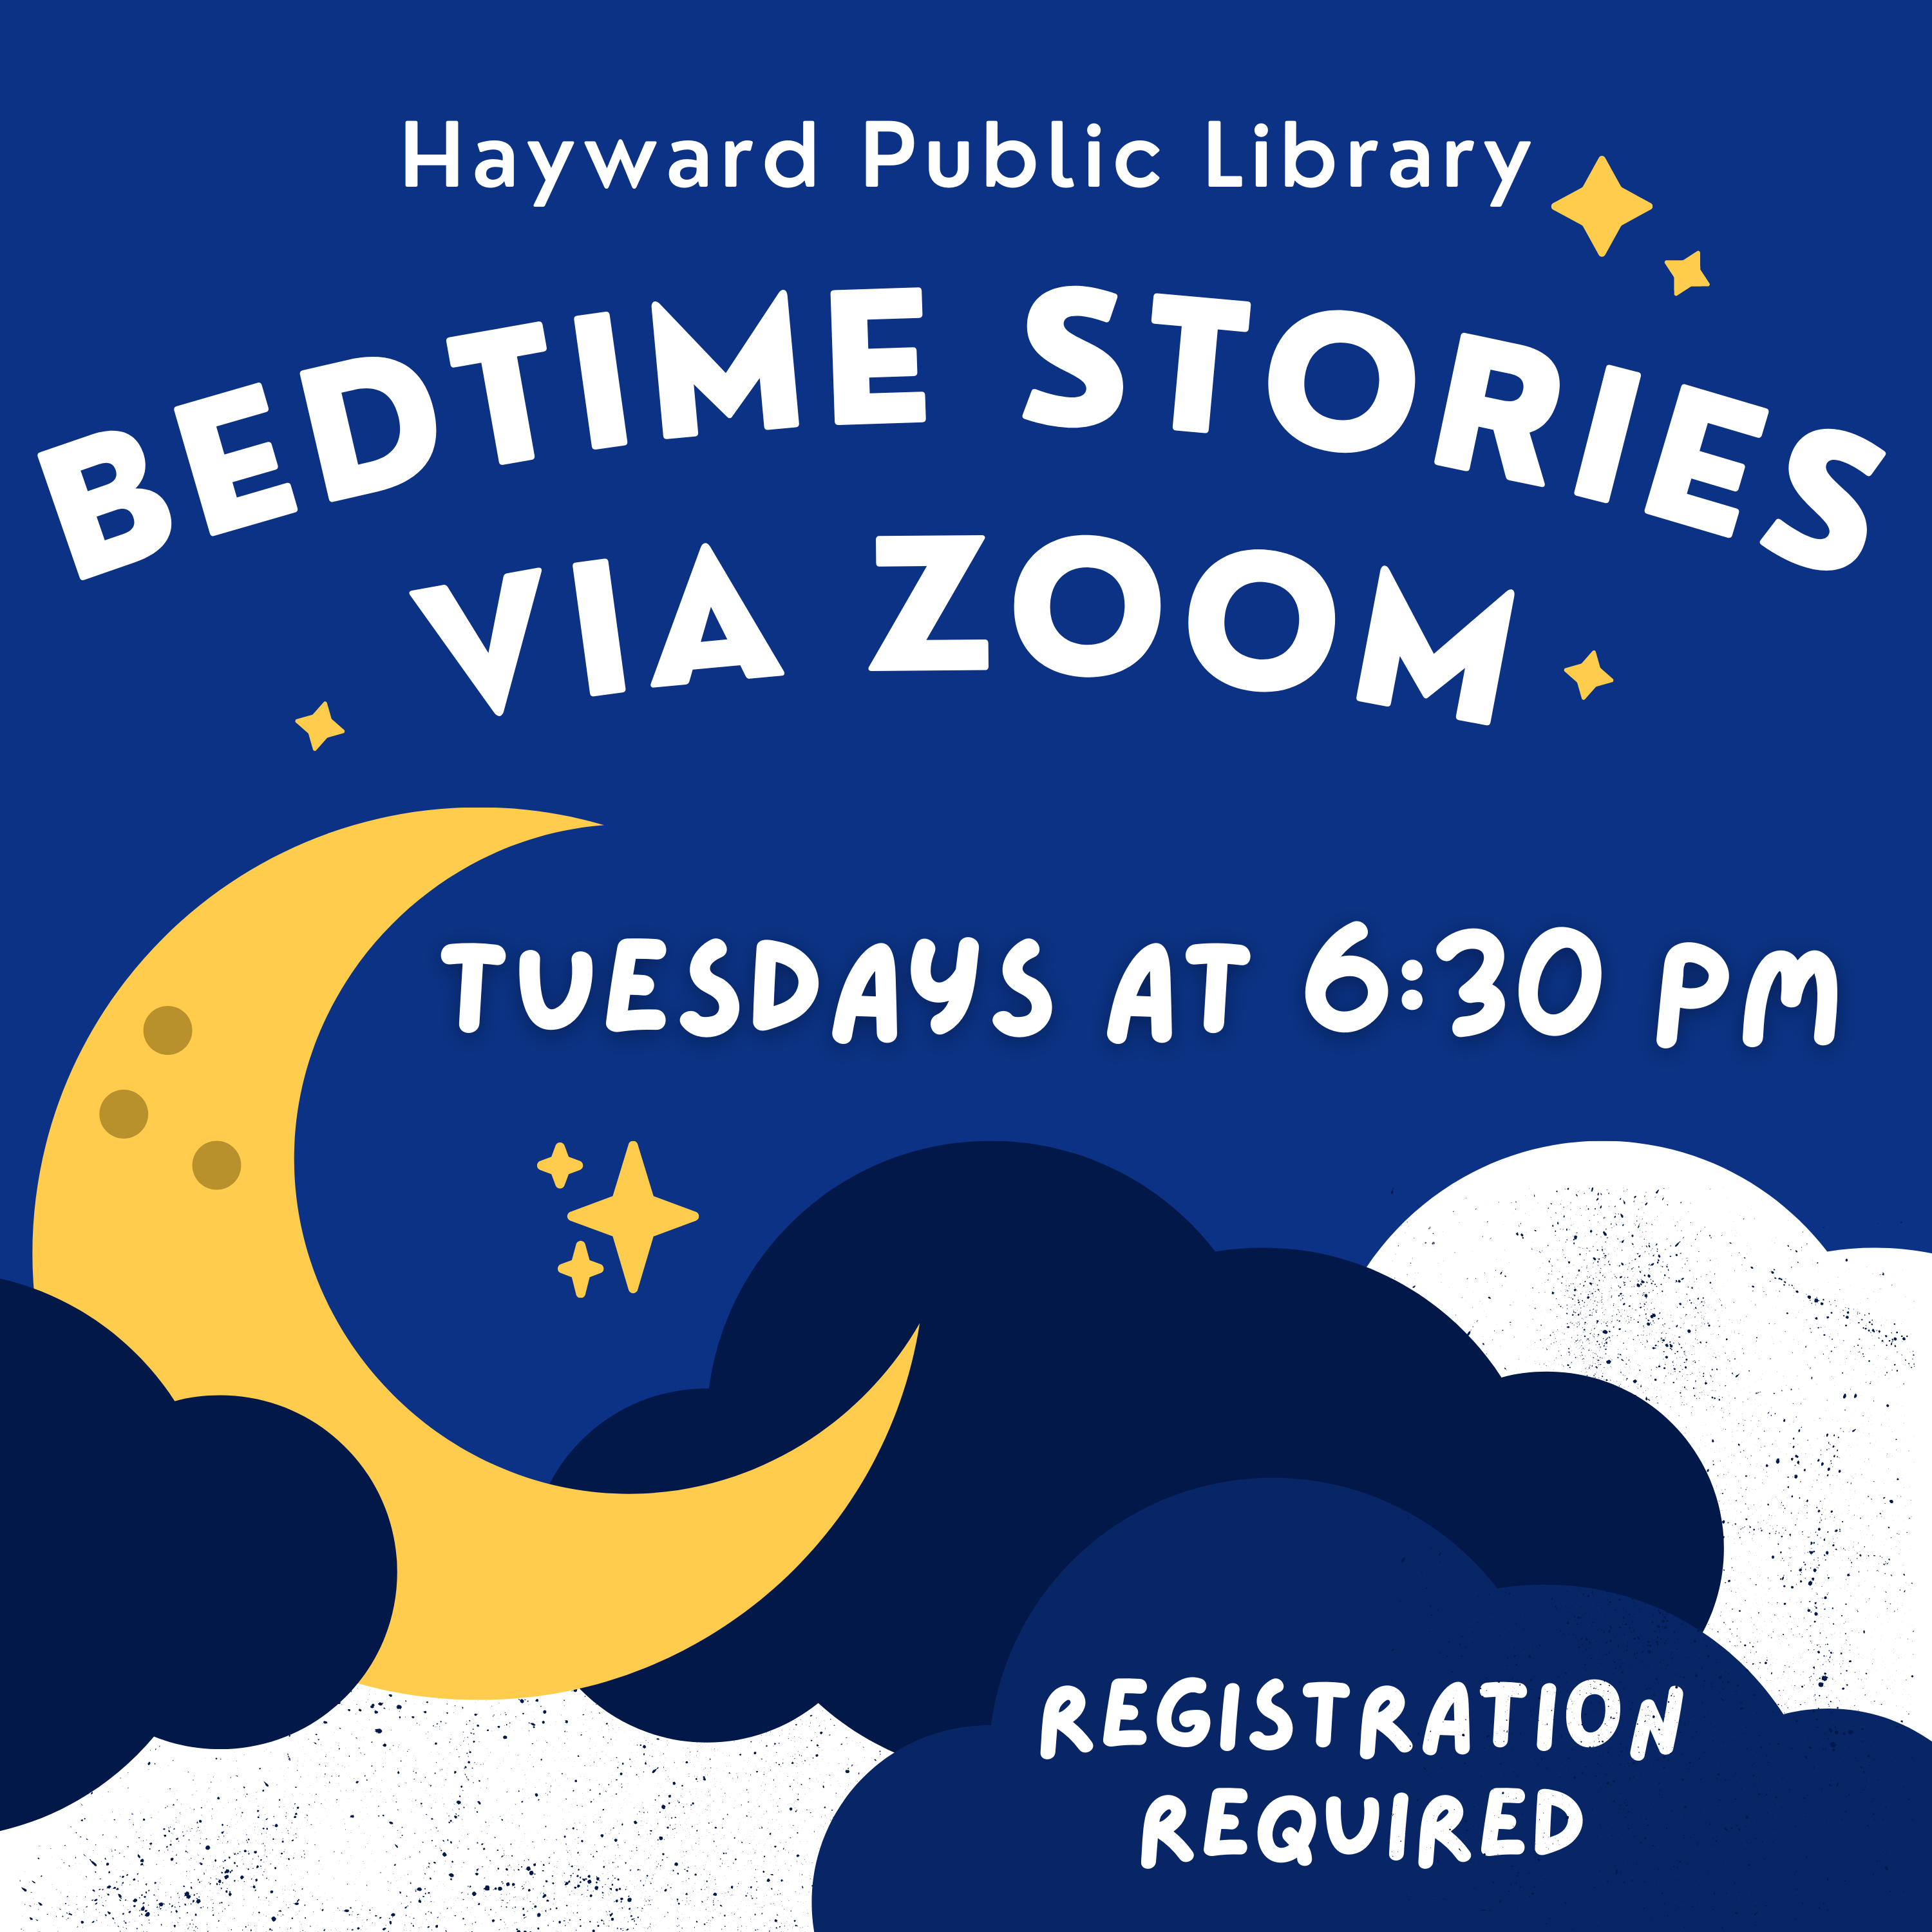 Bedtime Stories via Zoom, Tuesdays at 6:30 pm, registration required